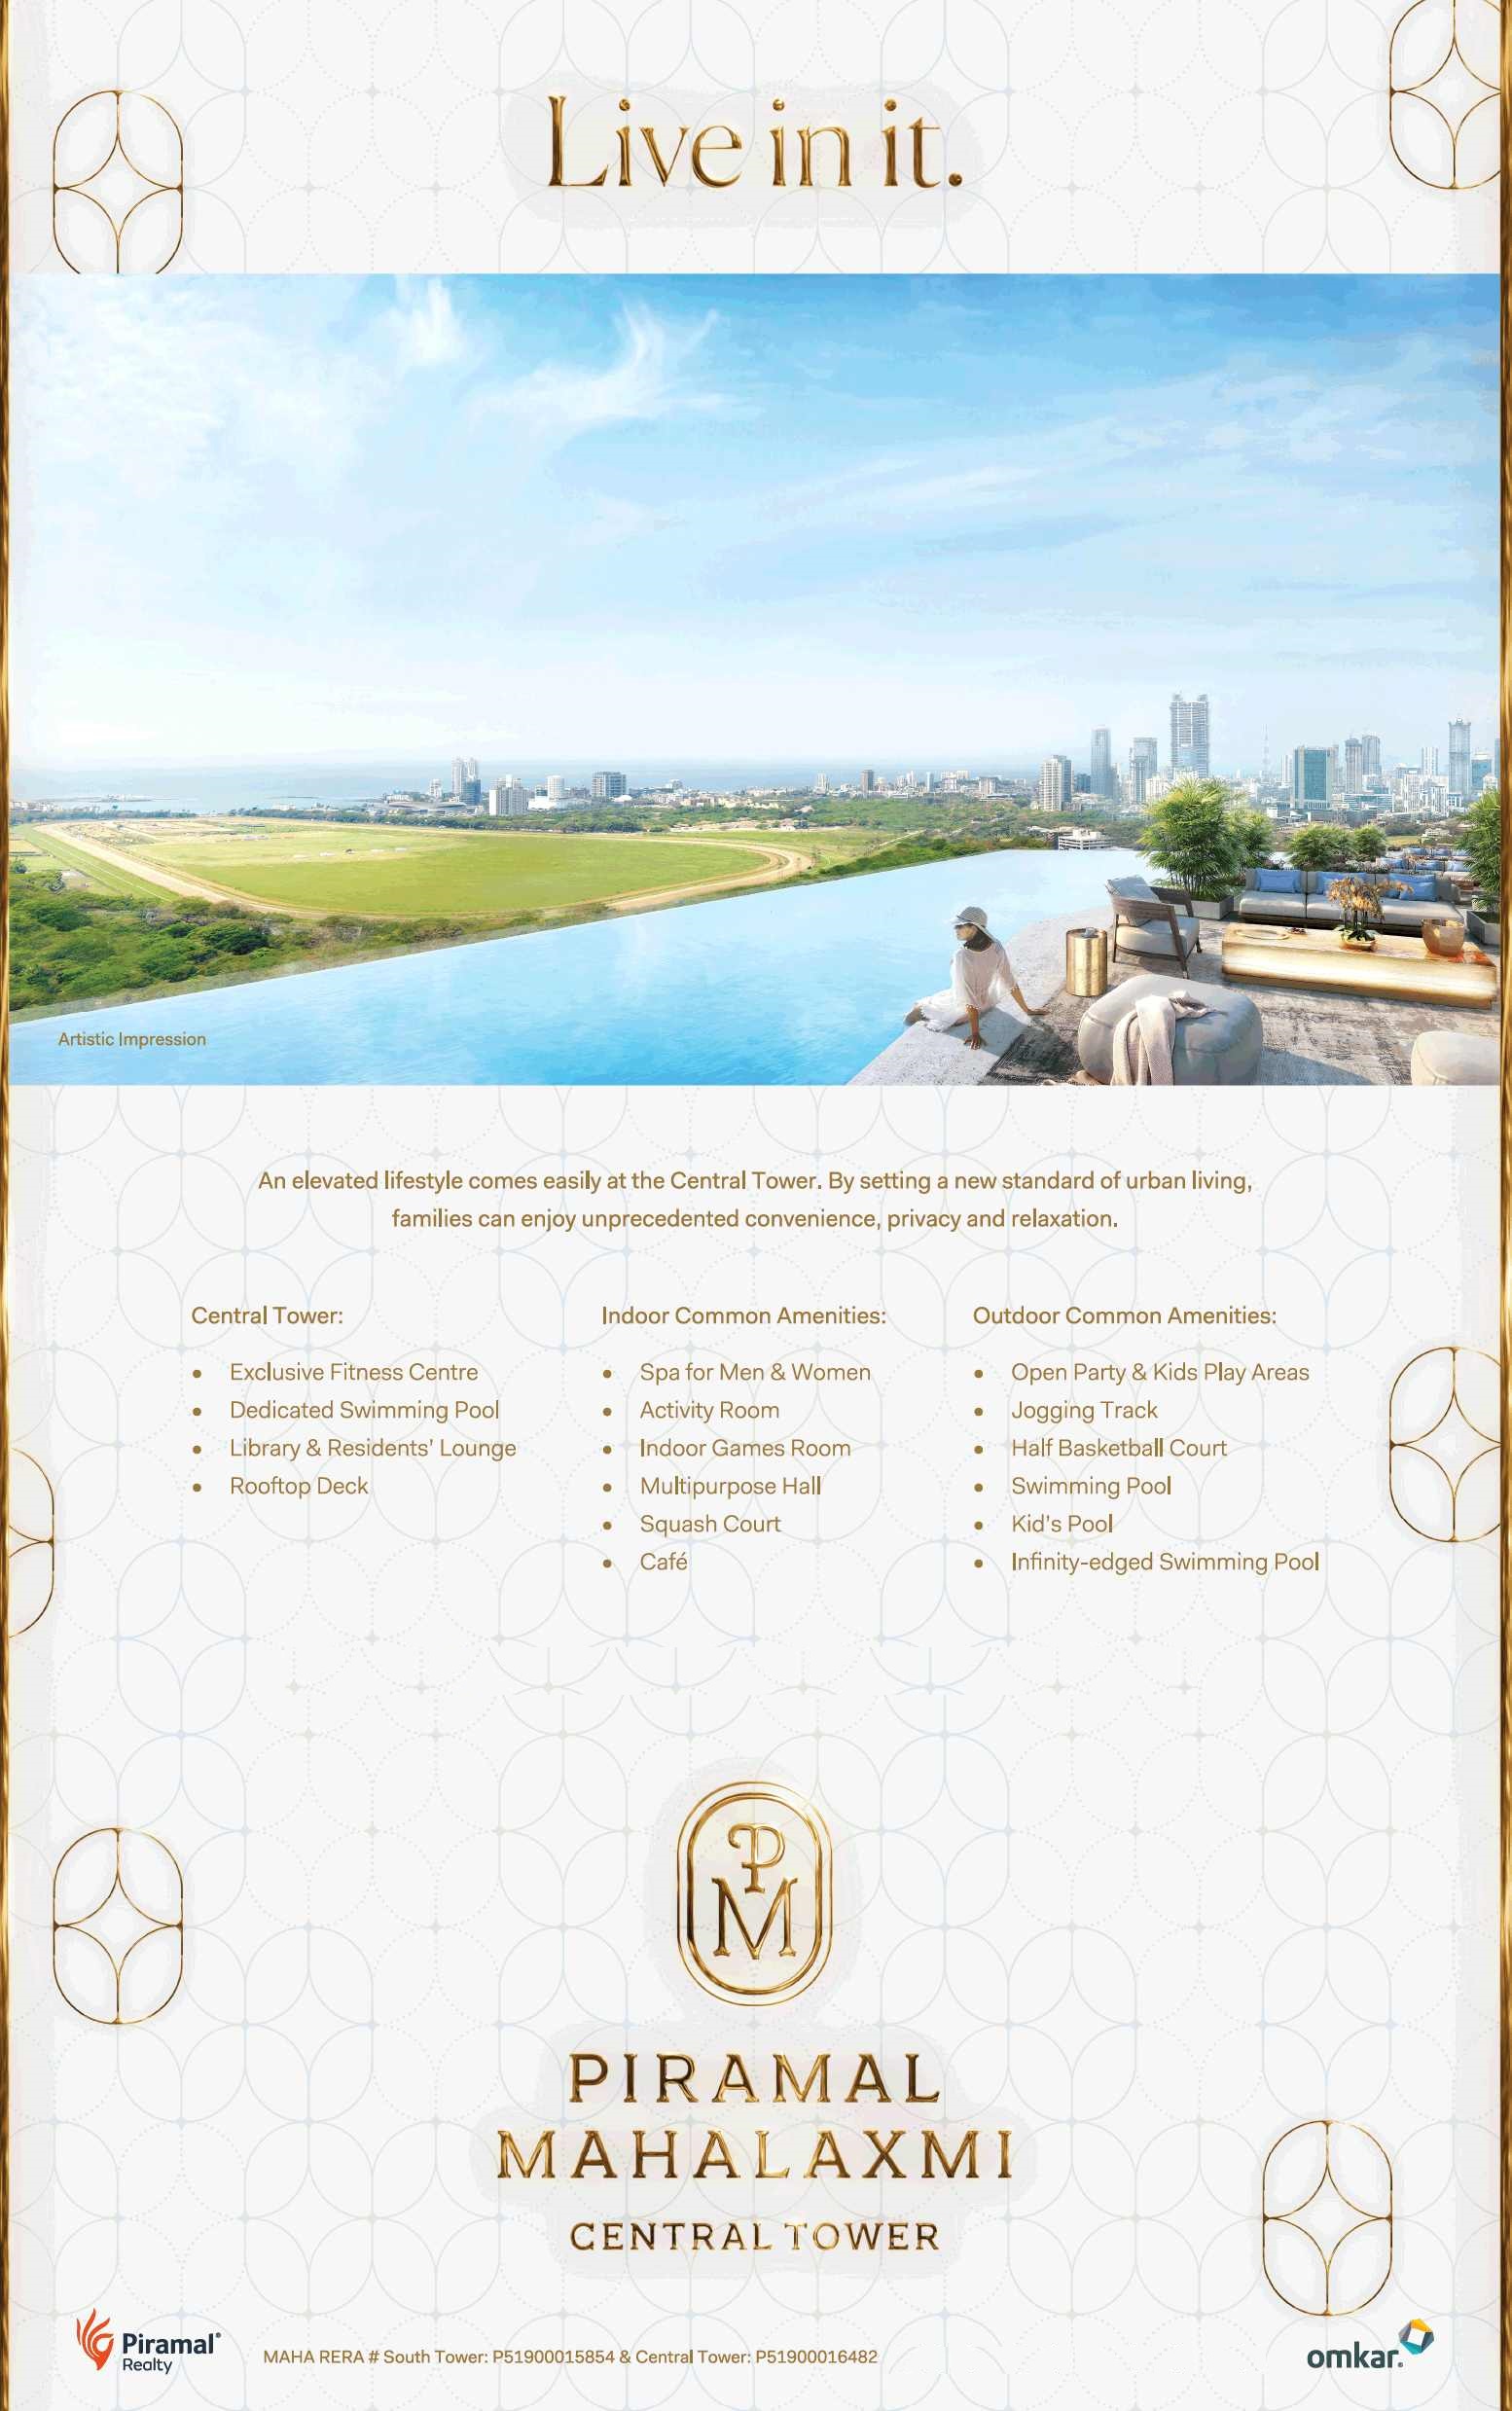 Book an elevated lifestyle comes easily at the central tower at Piramal Mahalaxmi in Mumbai Update